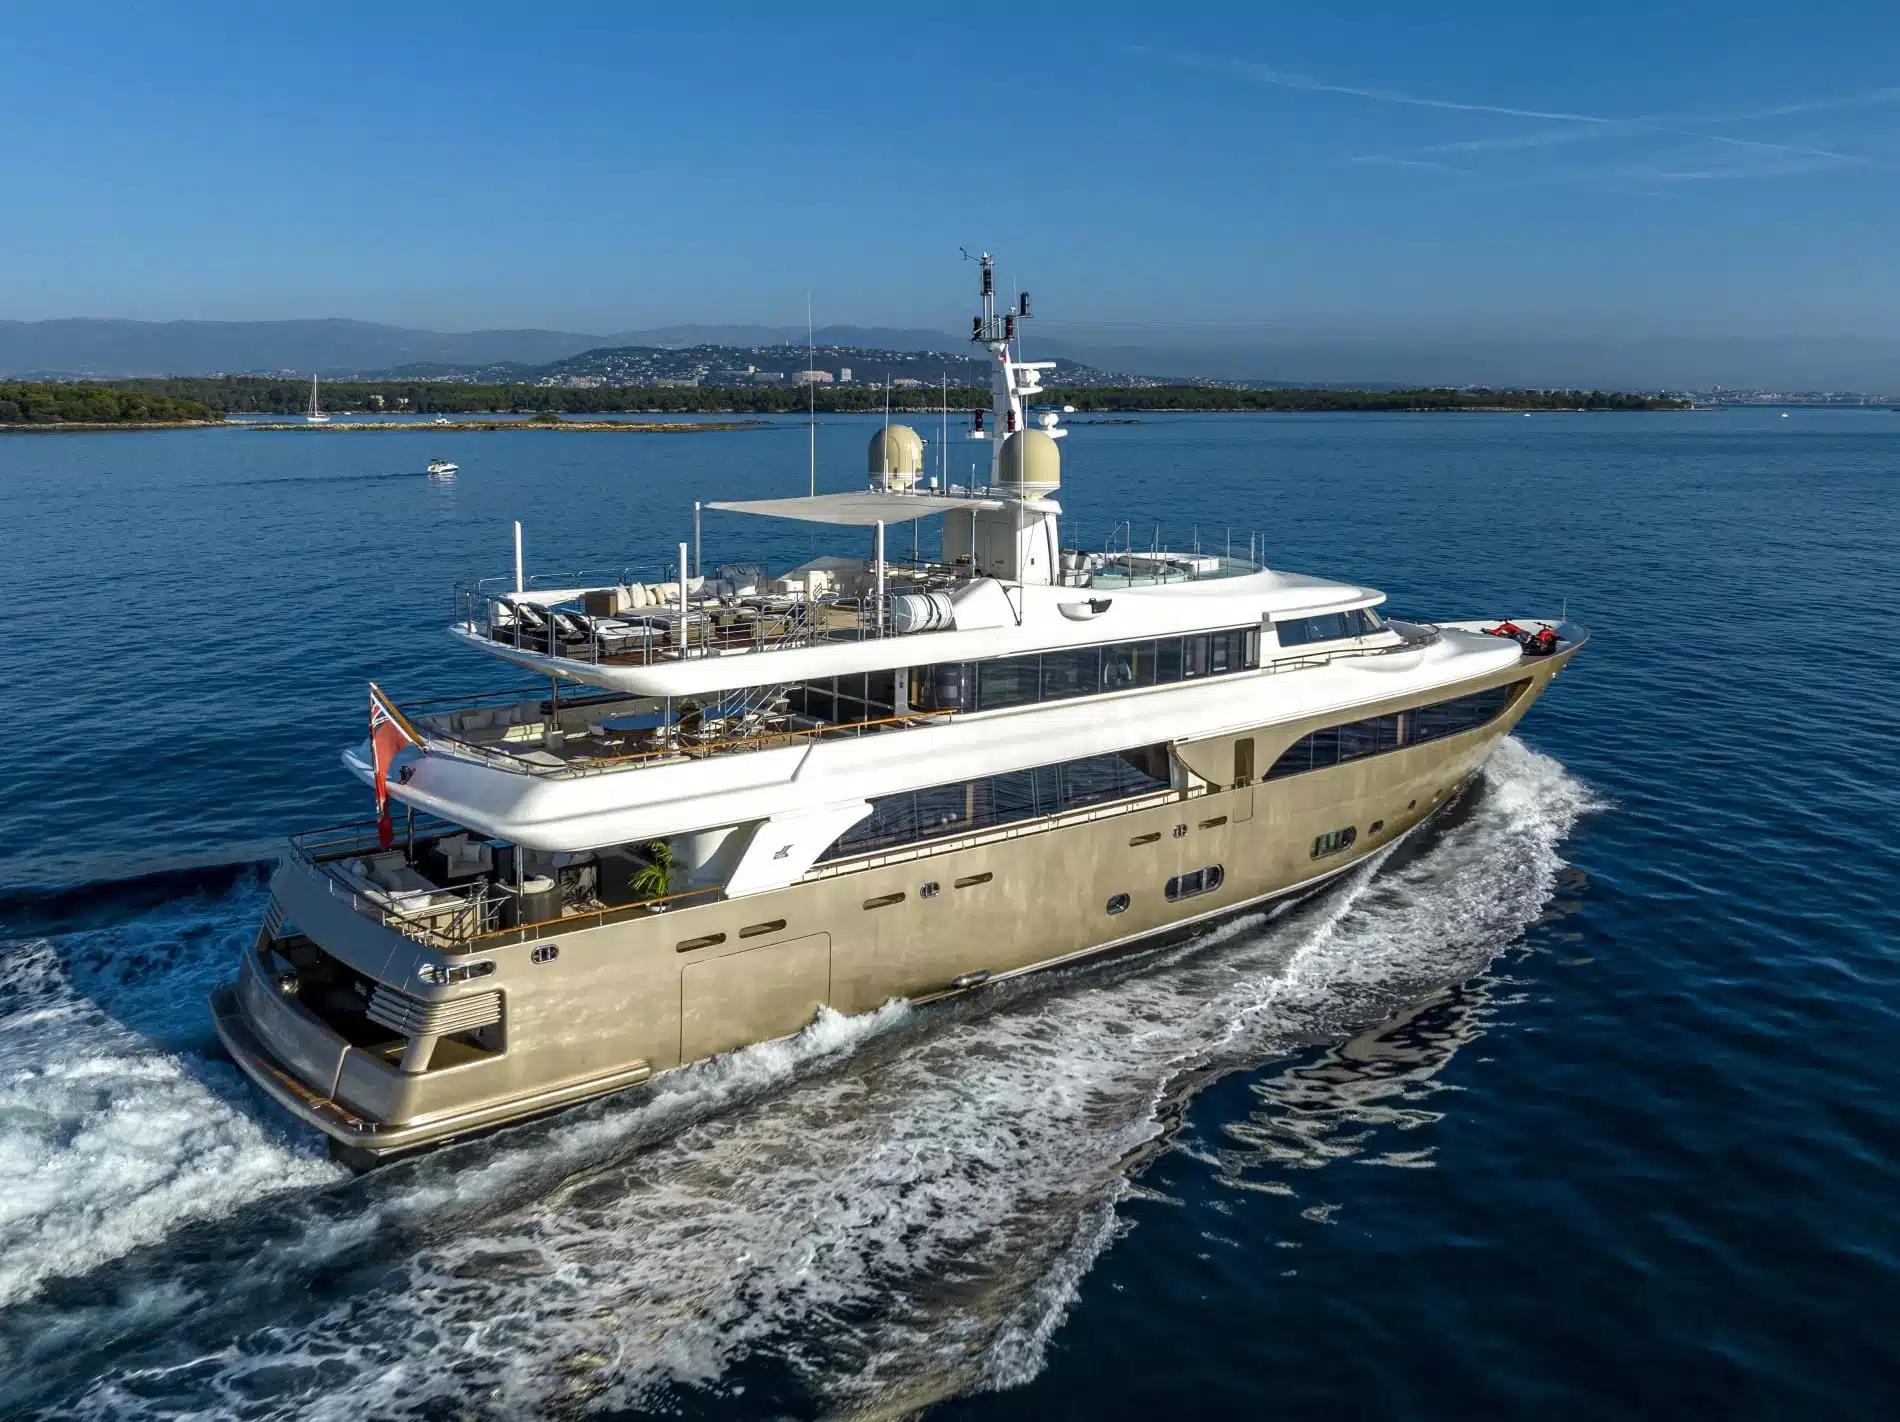 yacht-crn-142ft-updated1